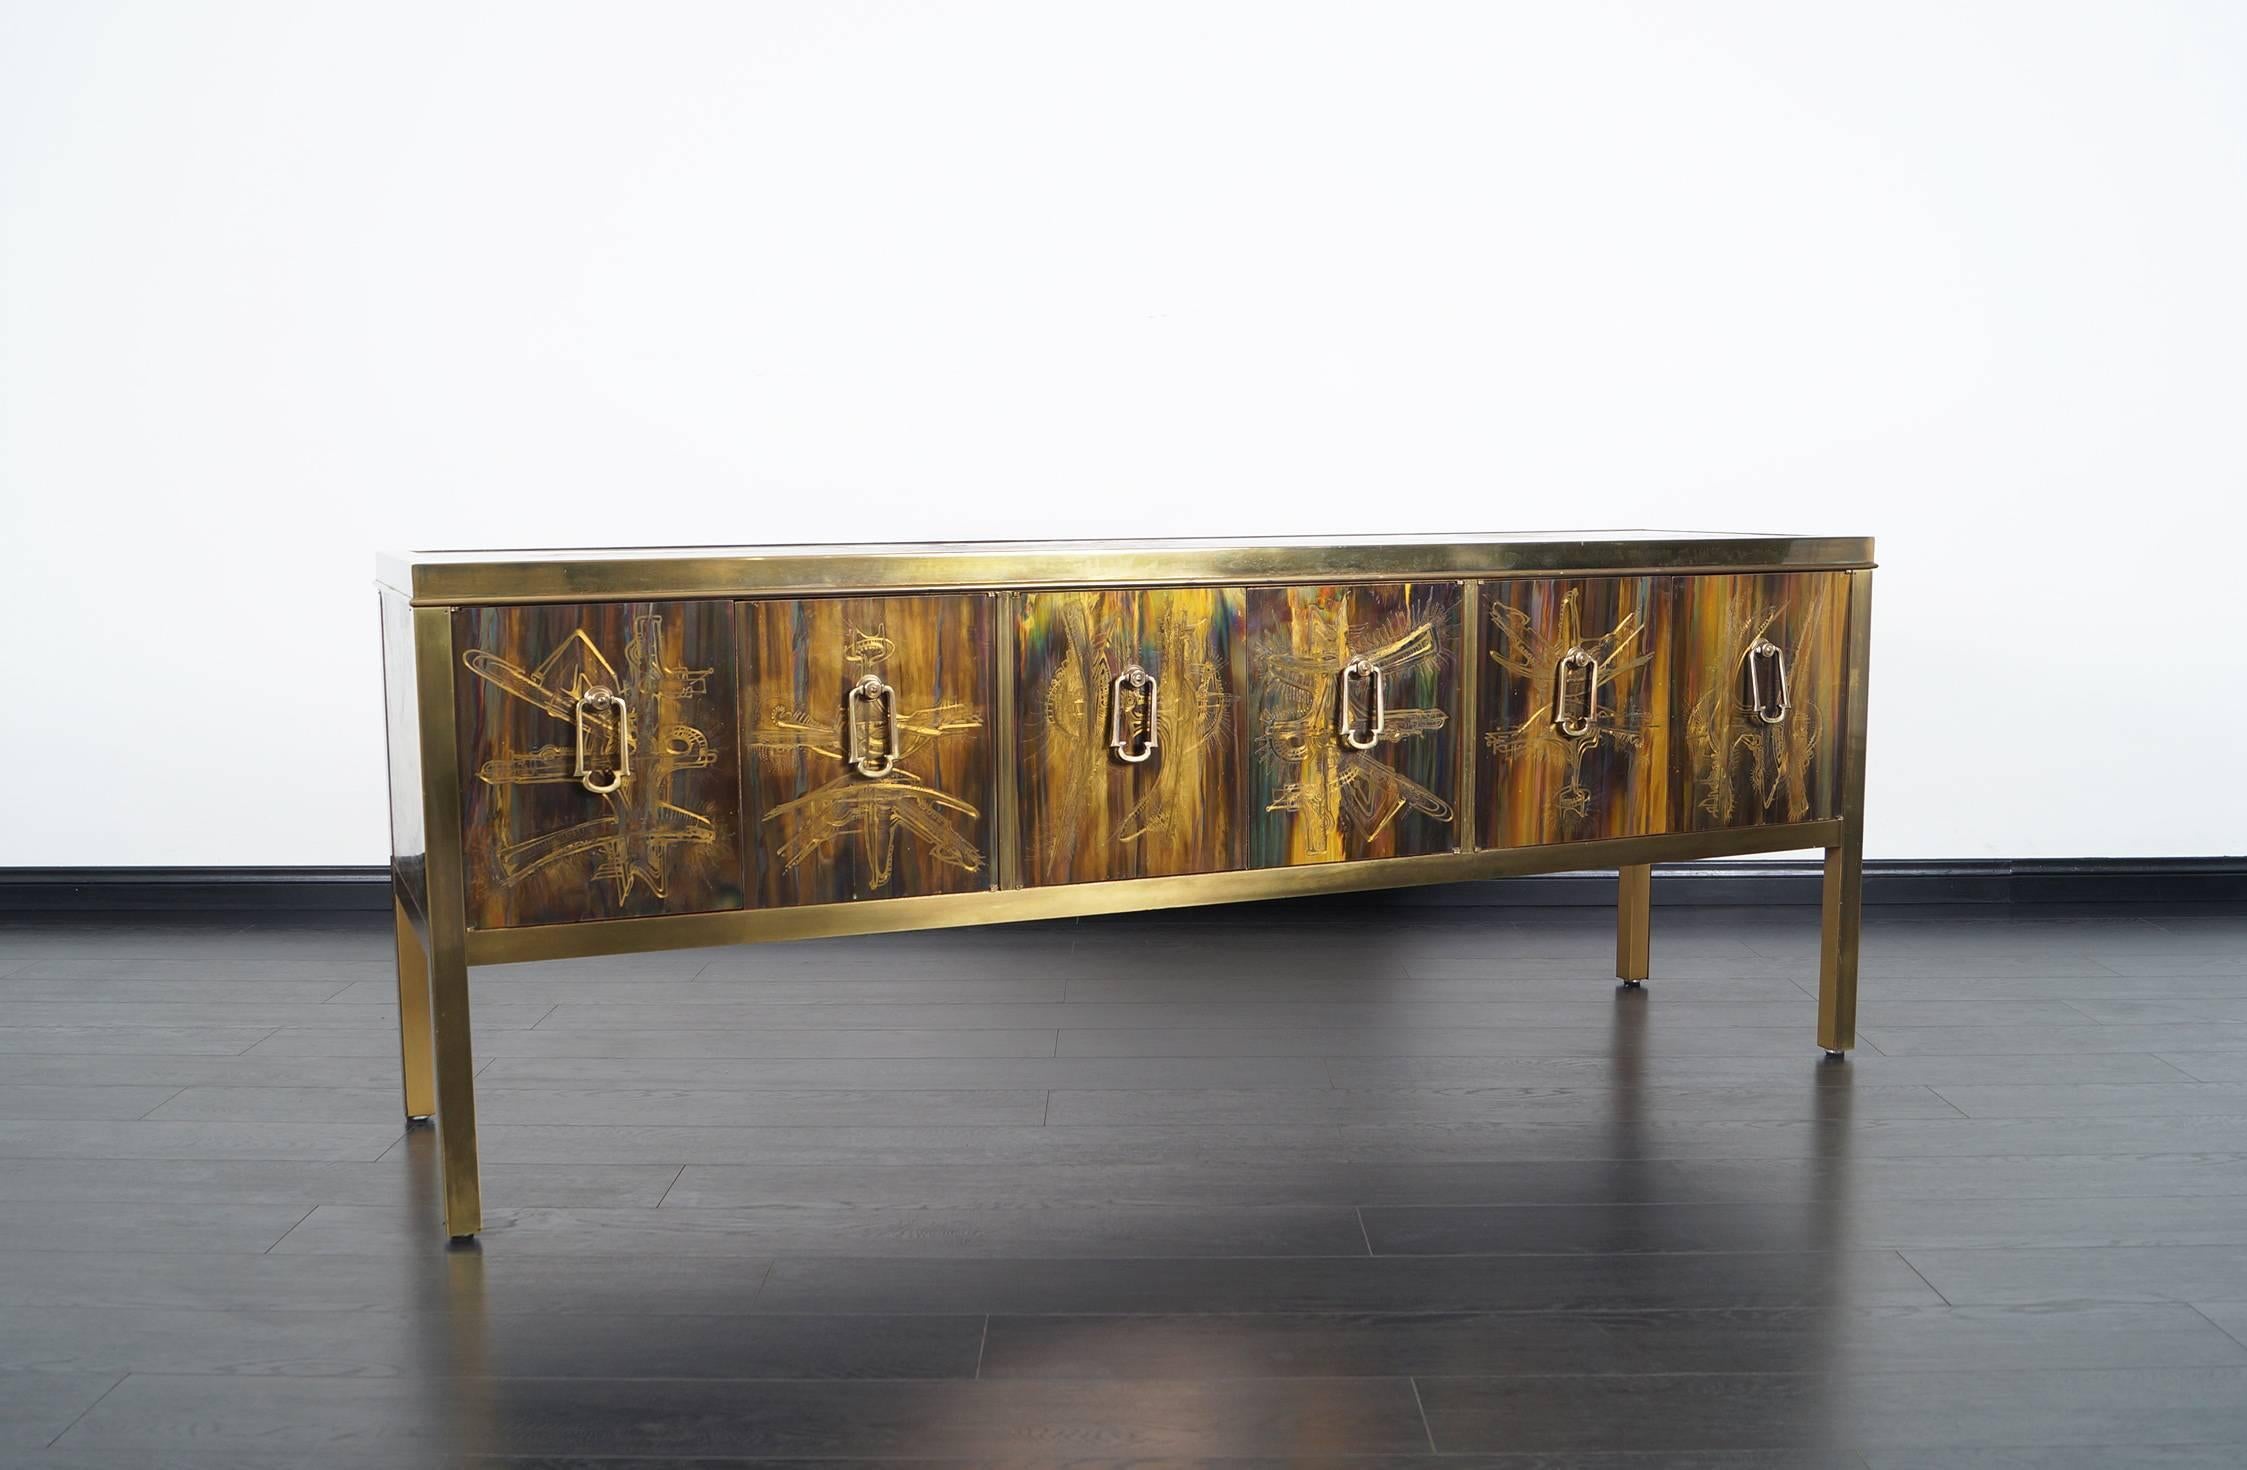 This stunning acid etched credenza by Mastercraft, with aced etched panels by Bernhard Rohne for Mastercraft. Features a unique acid etched design and solid brass pulls that are used to open six doors that reveal storage space.